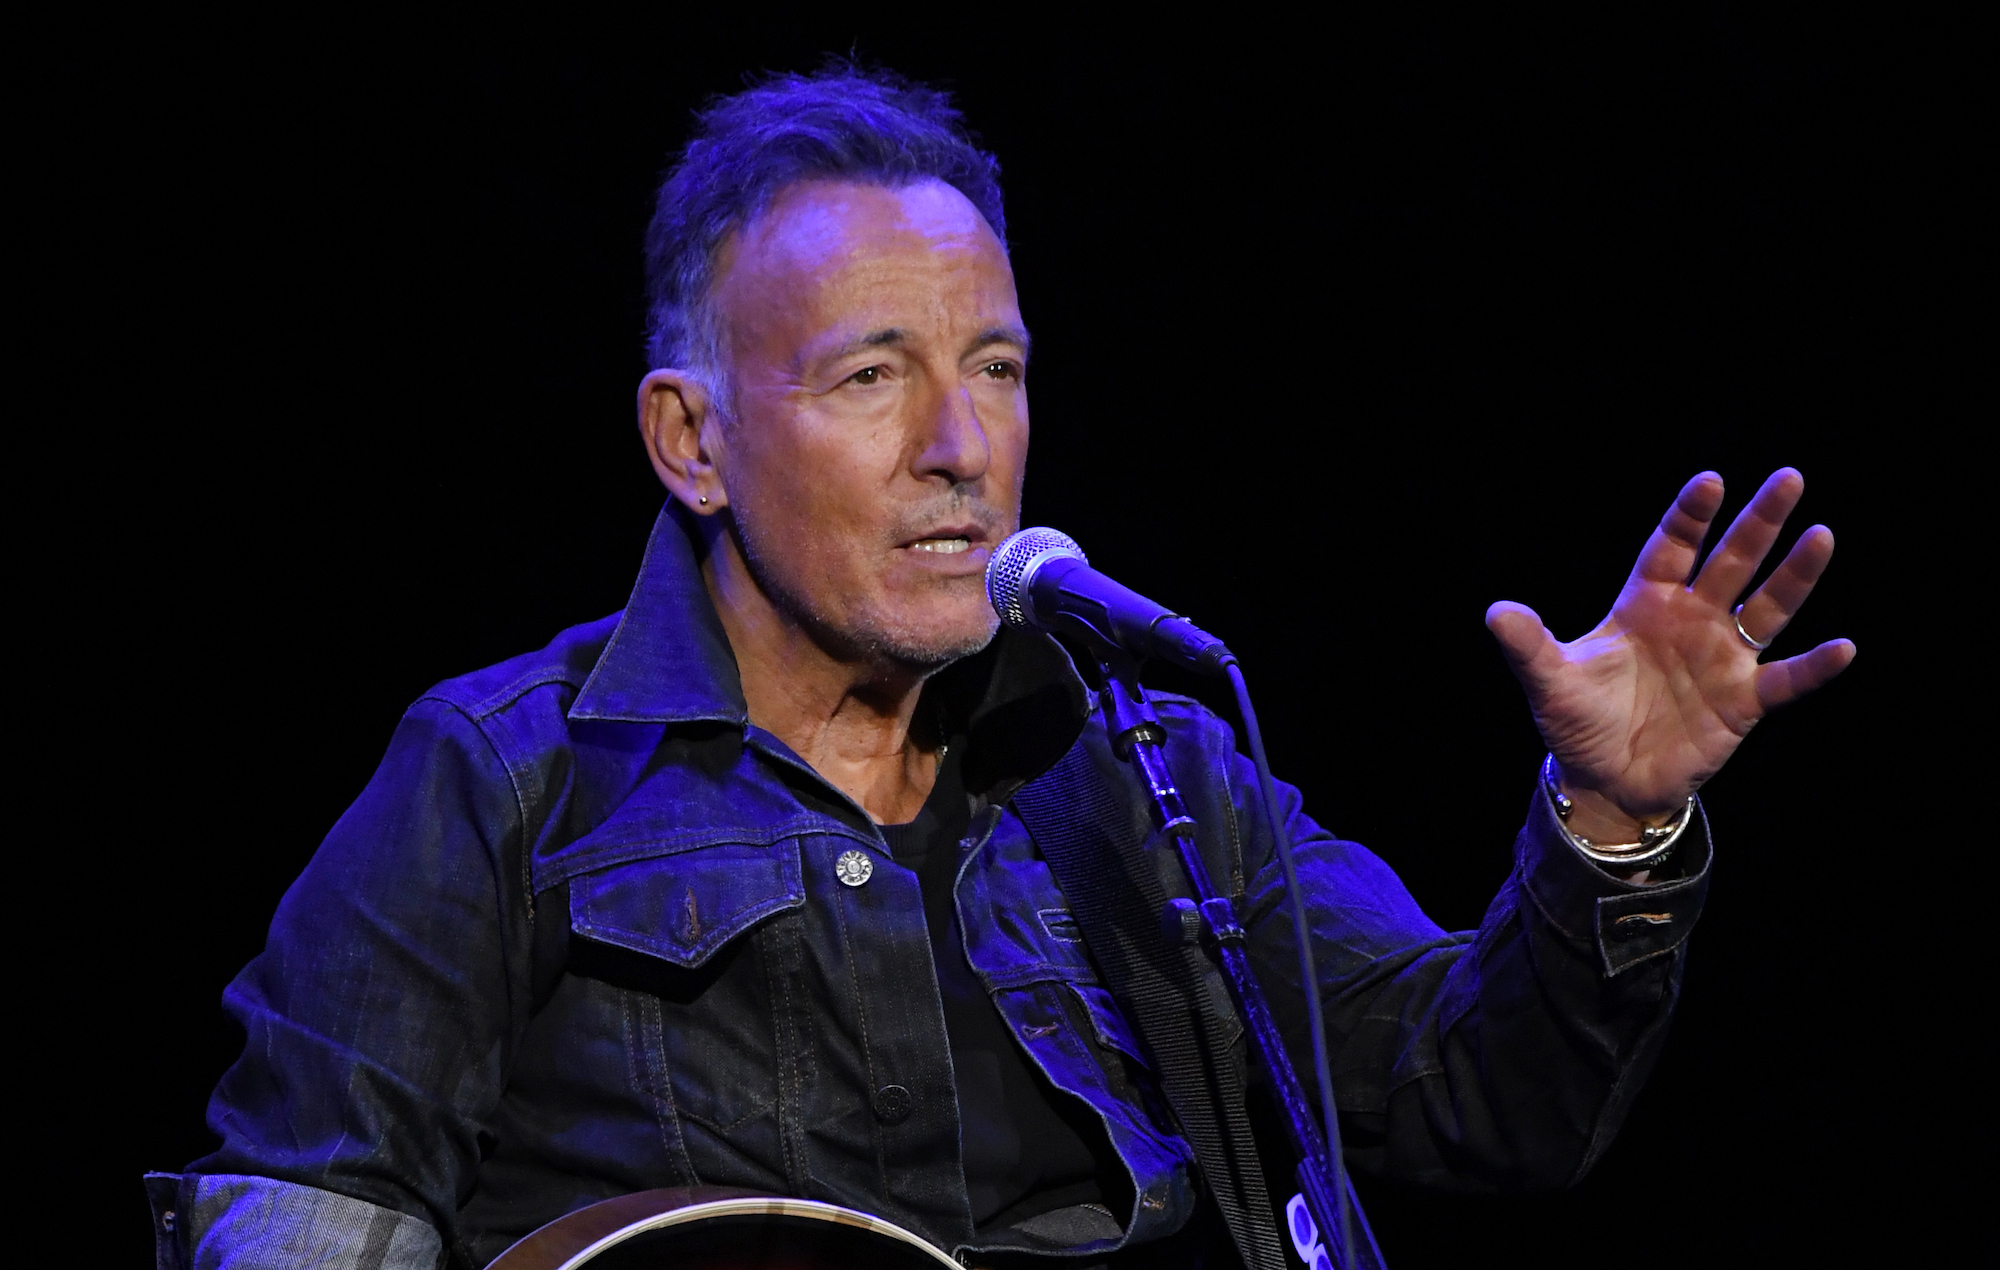 2000x1270 Bruce Springsteen confirmed as the highest-paid musician of 2021